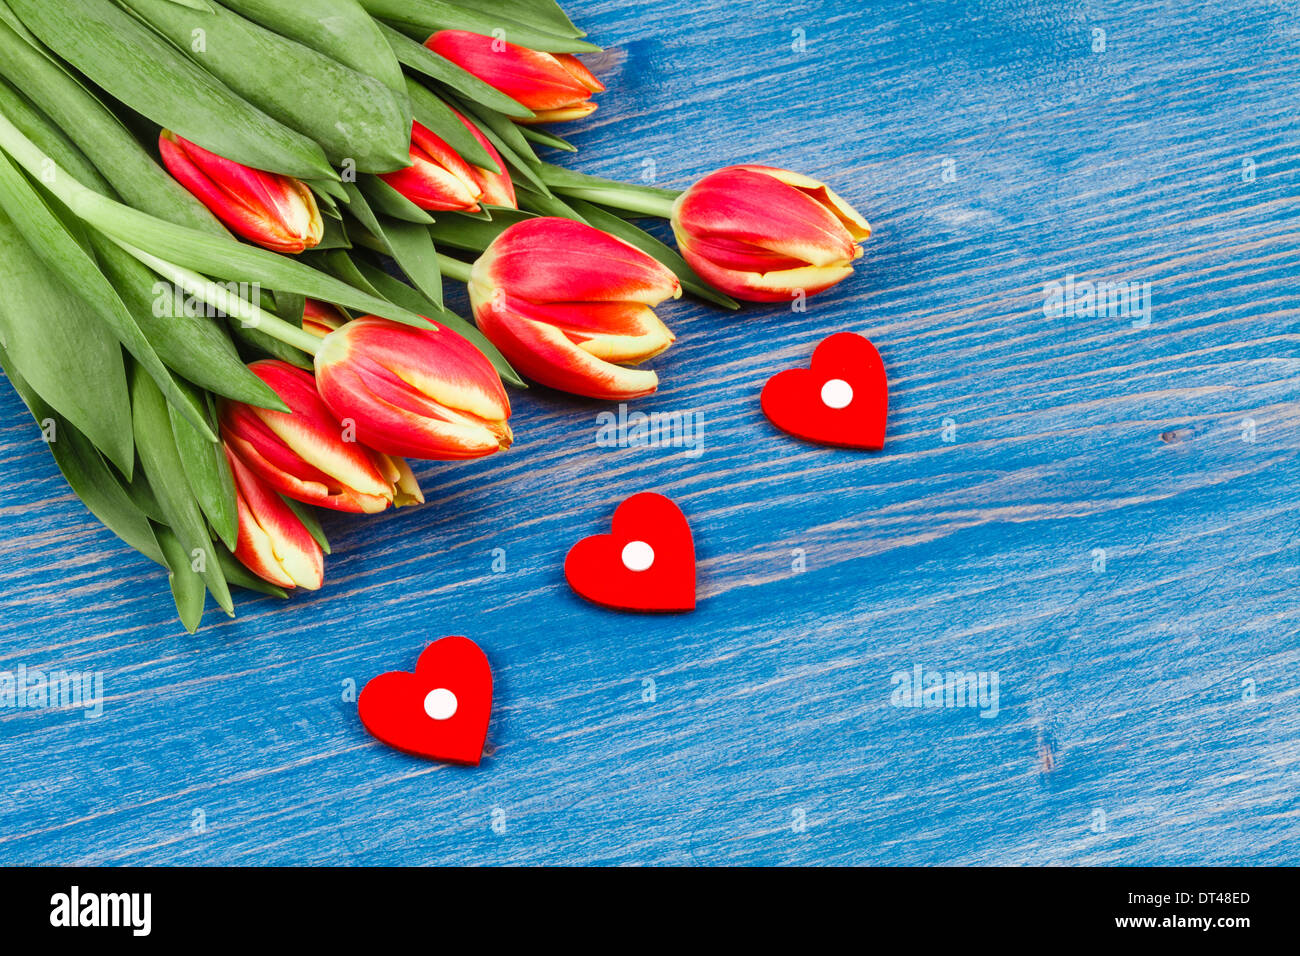 Tulip bouquet on a blue background with 3 little hearts Stock Photo